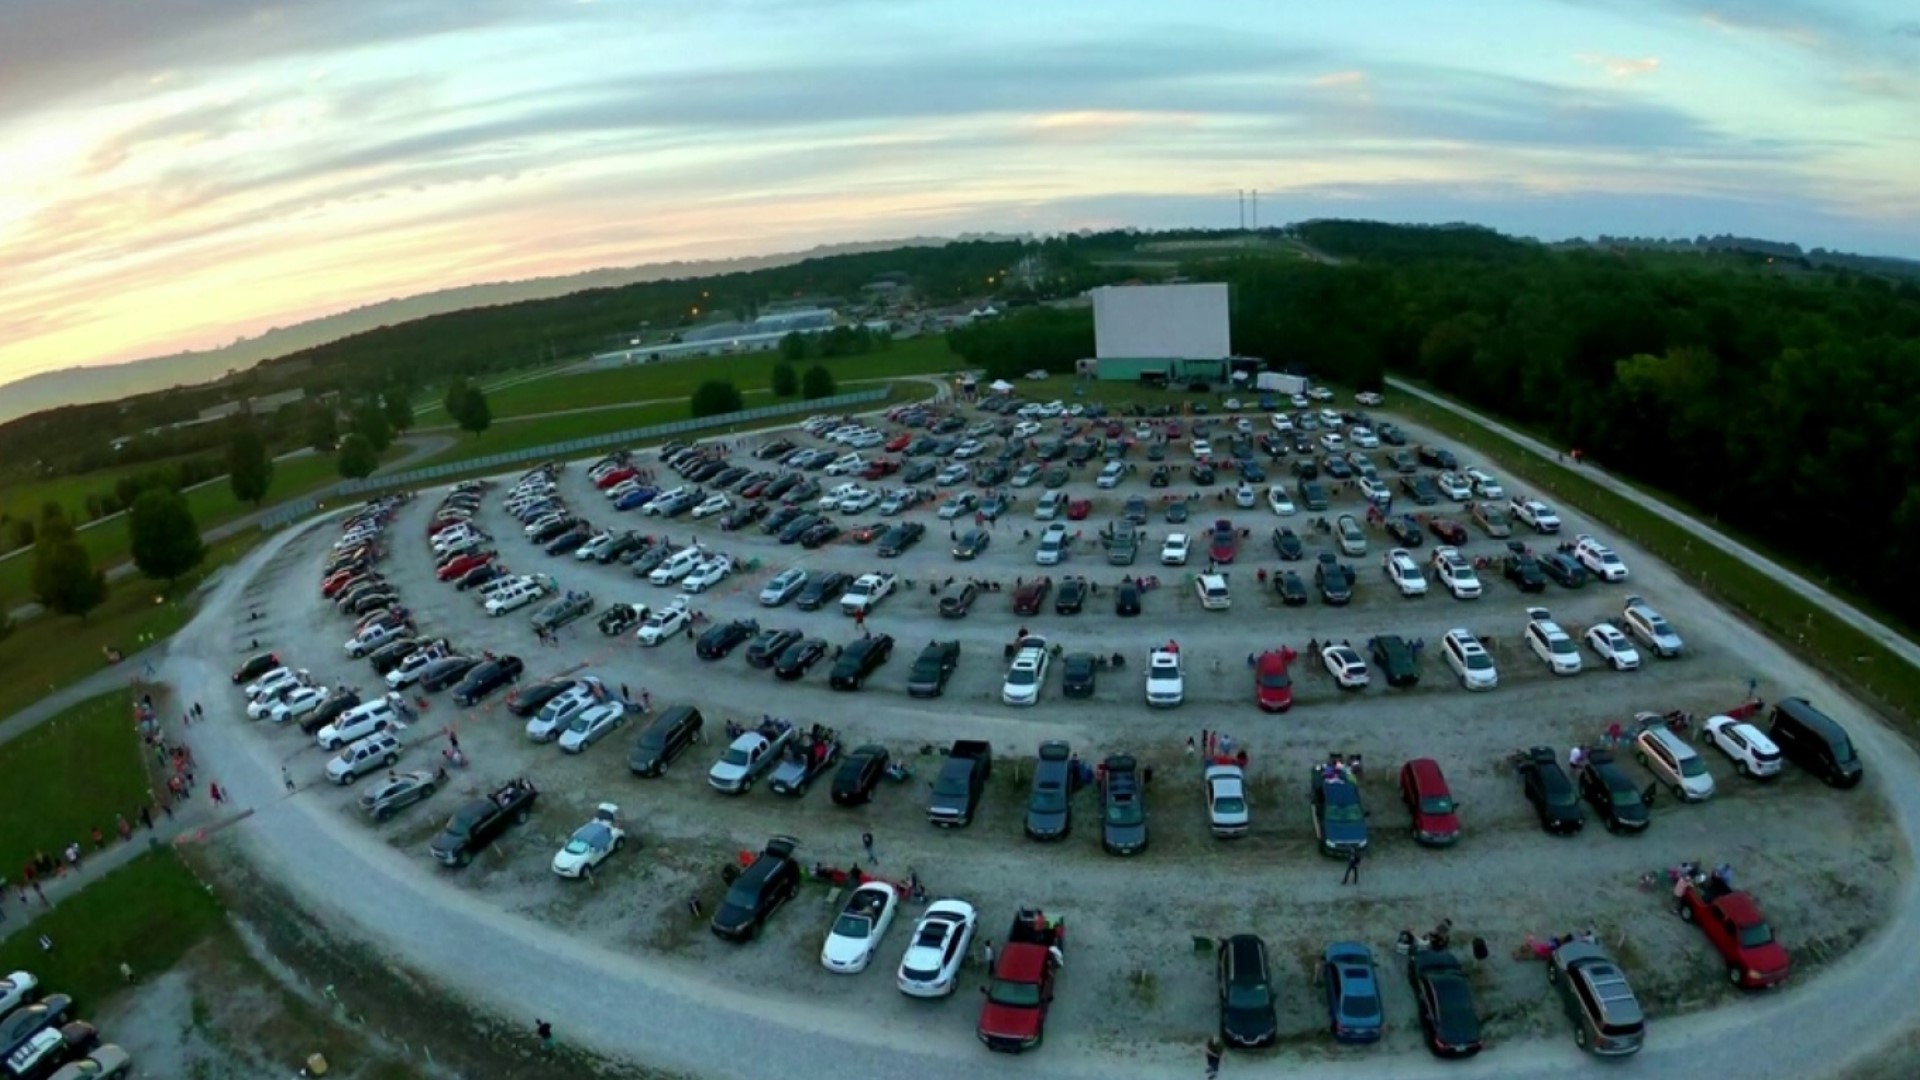 Fayetteville's 112 Drive-In is one of three Arkansas drive-in theaters remaining in 2022, but will be closing at the end of August.